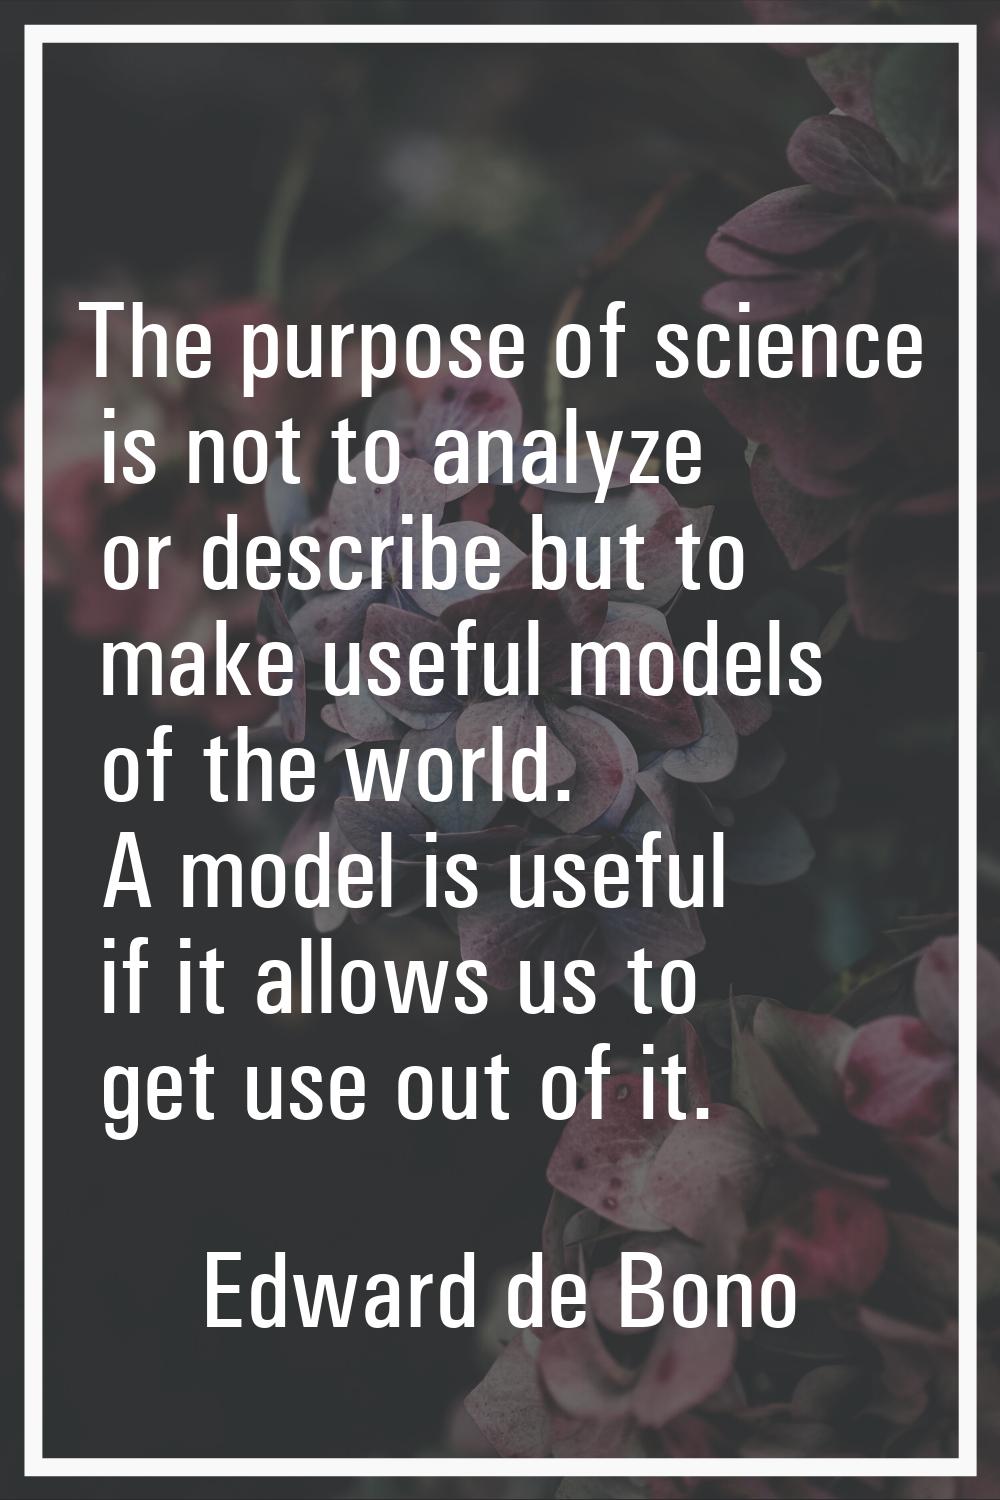 The purpose of science is not to analyze or describe but to make useful models of the world. A mode